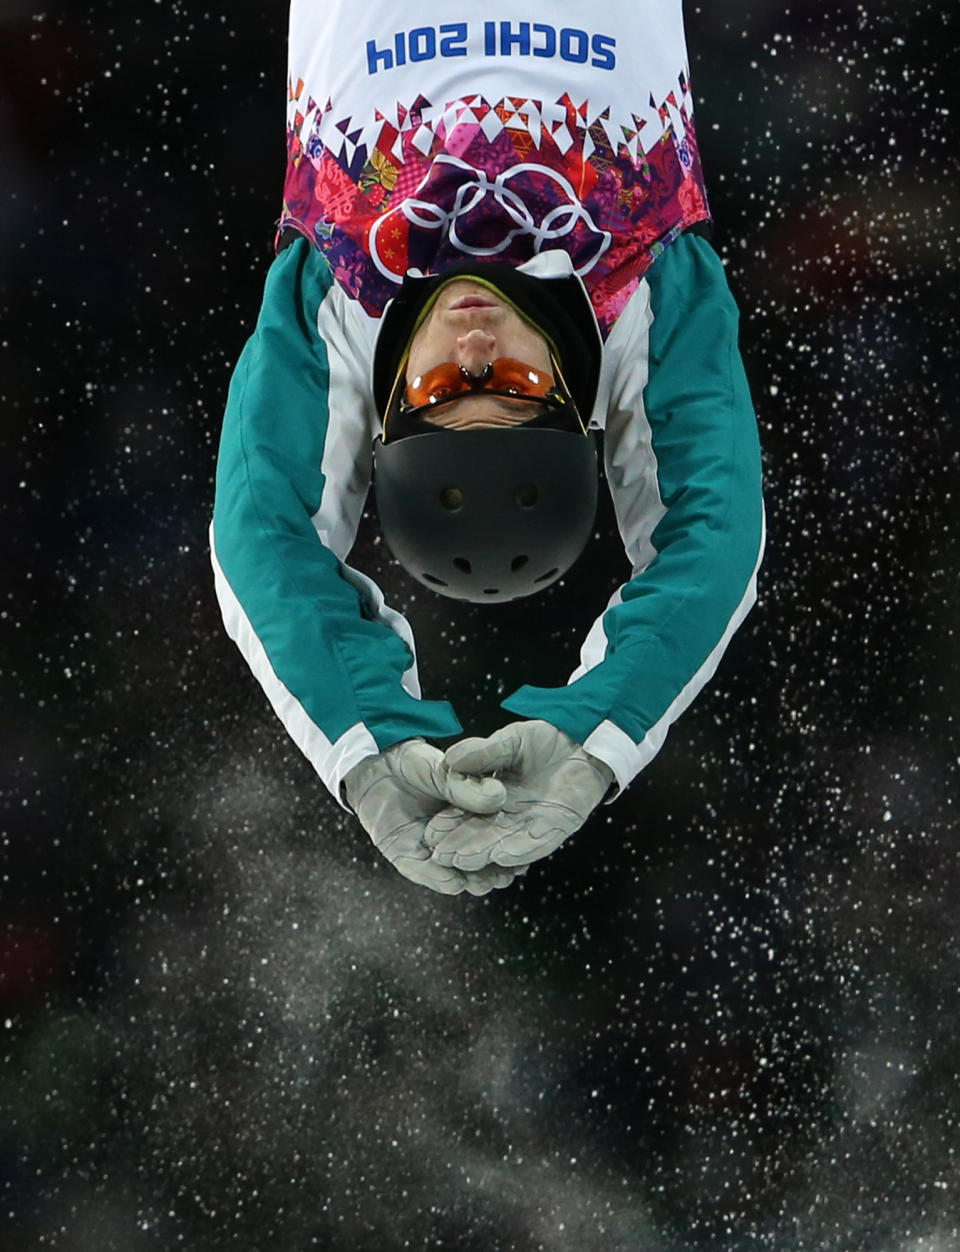 Australia's David Morris jumps during the men's freestyle skiing aerials final at the Rosa Khutor Extreme Park, at the 2014 Winter Olympics, Monday, Feb. 17, 2014, in Krasnaya Polyana, Russia. (AP Photo/Sergei Grits)